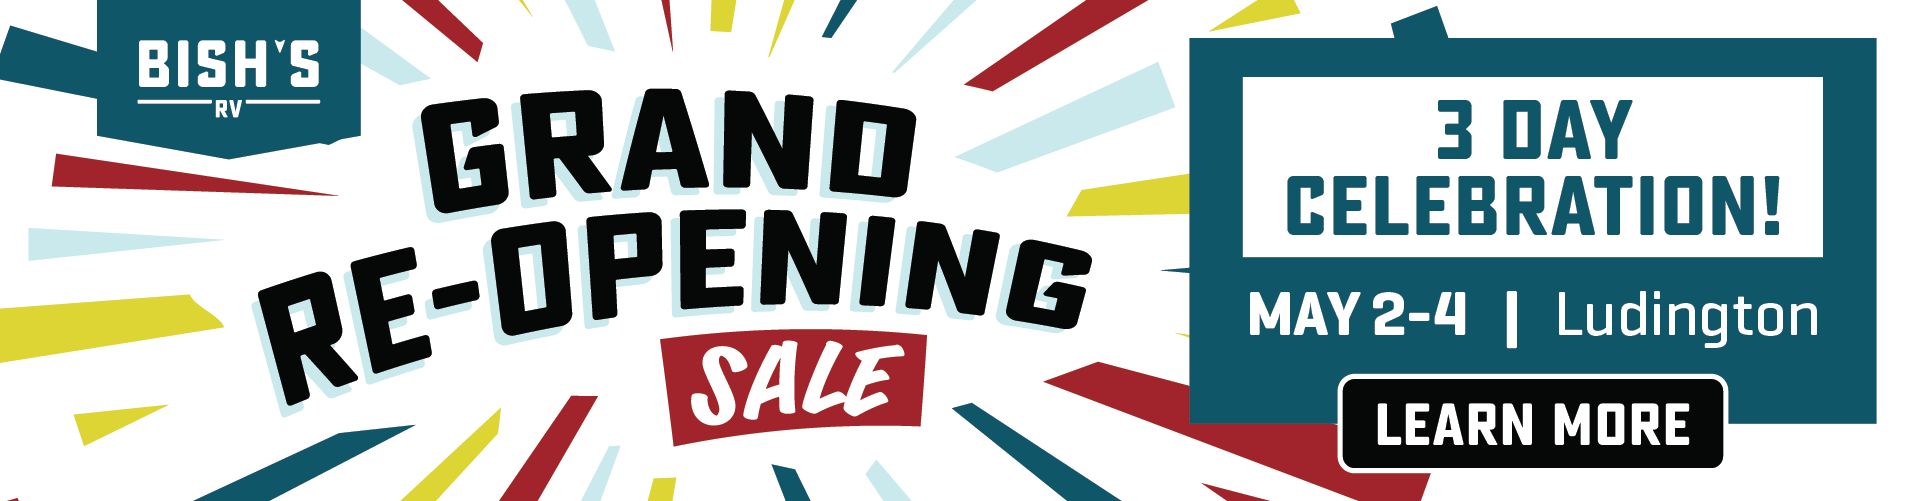 Grand Re-Opening Sale - May 2-4 - Bish's RV of Ludington, MI